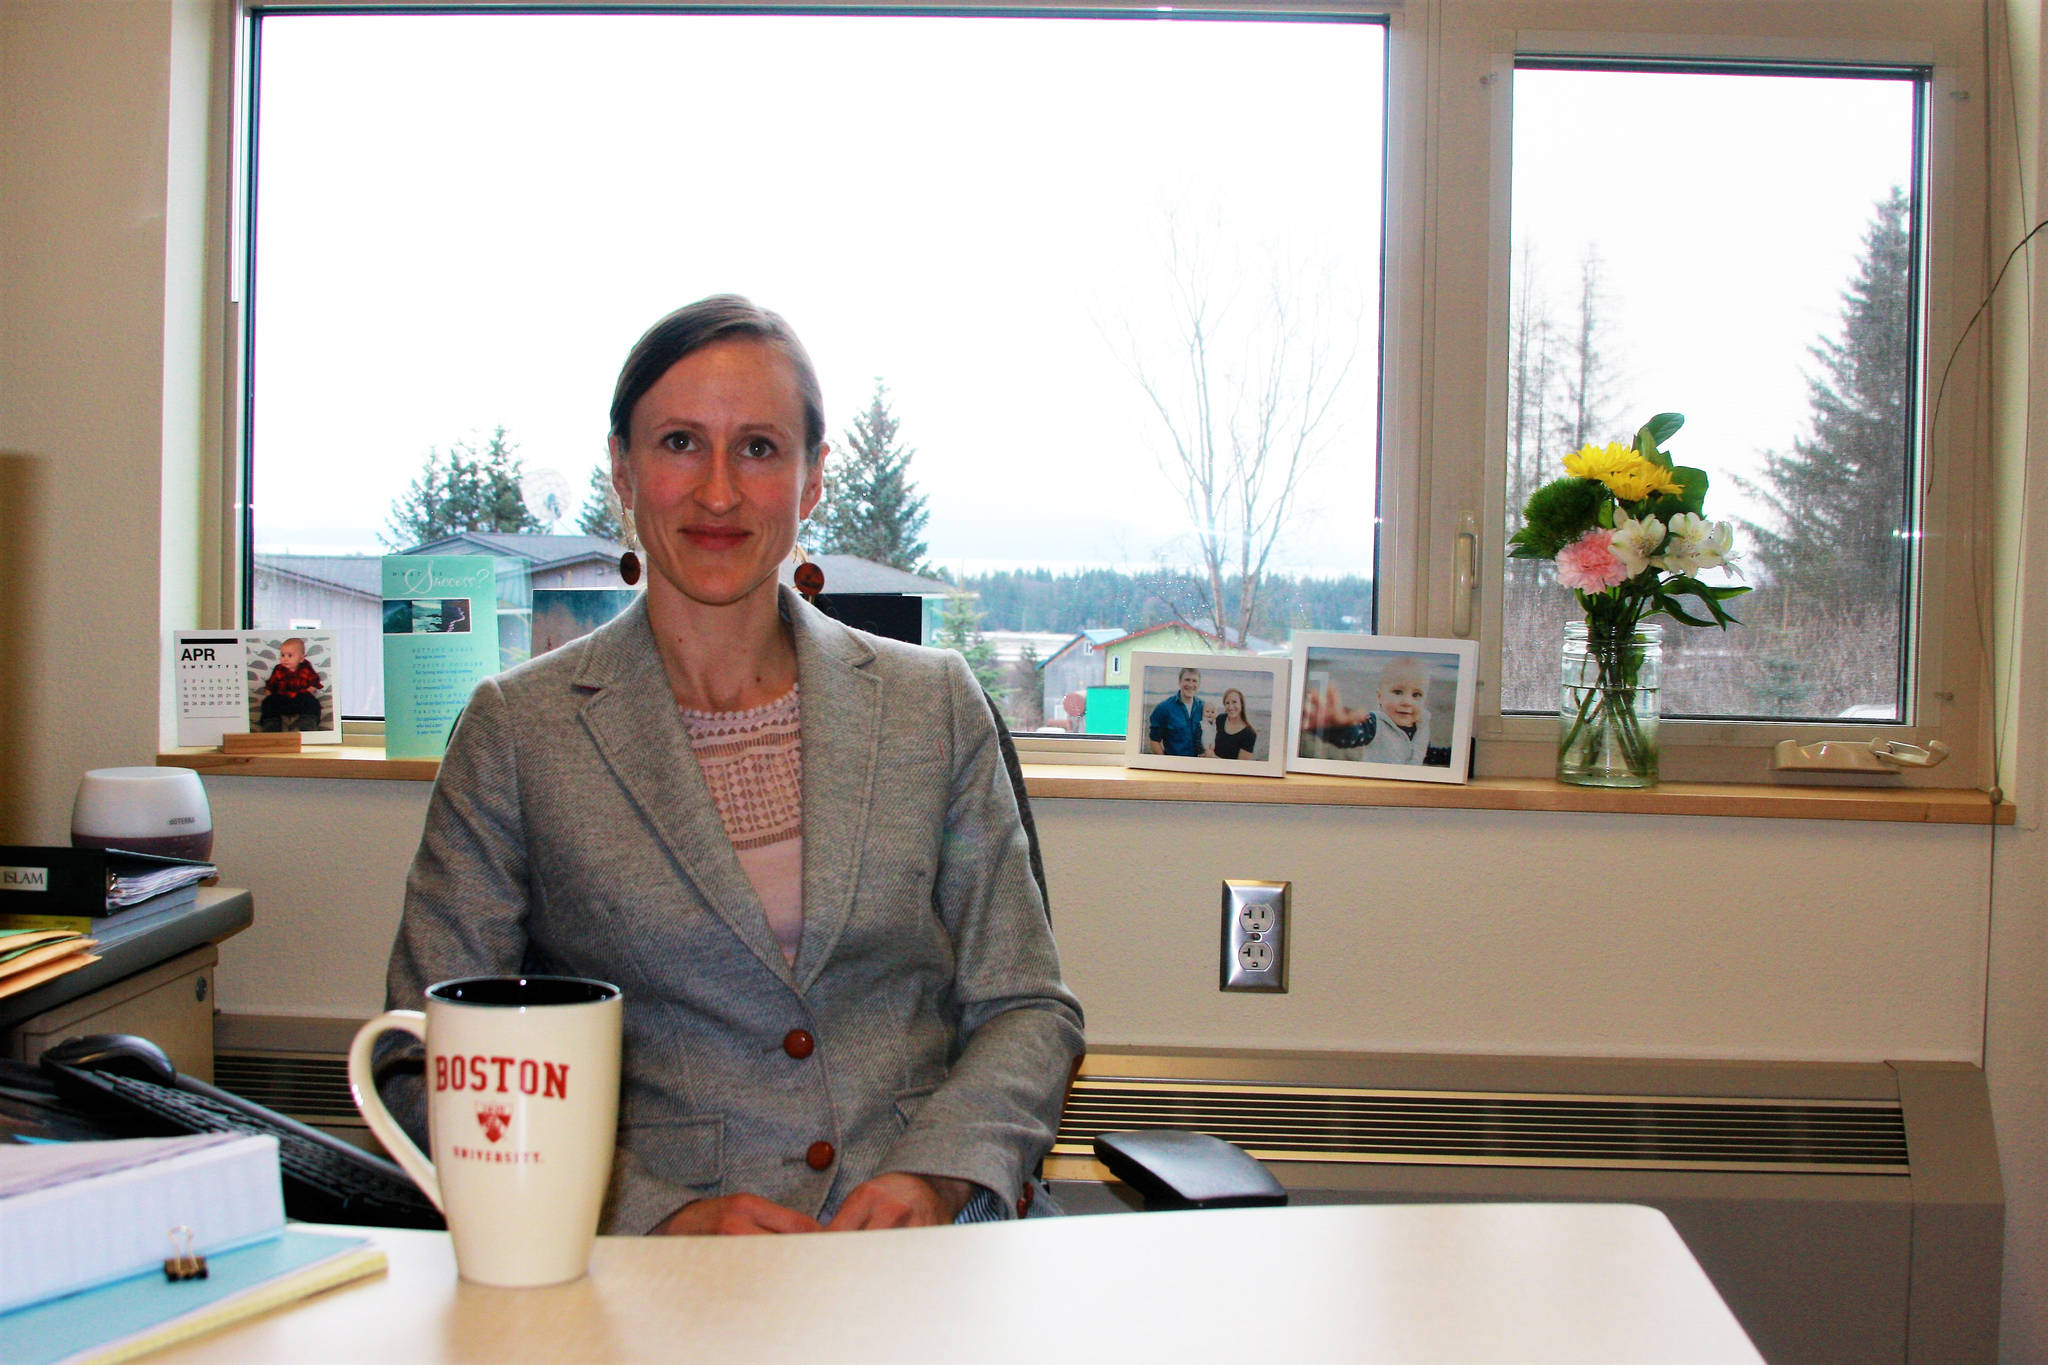 Assistant Professor of English Lia Calhoun poses in her office in Bayview Hall on Wednesday, April 4, 2018 at Kachemak Bay Campus in Homer, Alaska. (Photo by Delcenia Cosman)